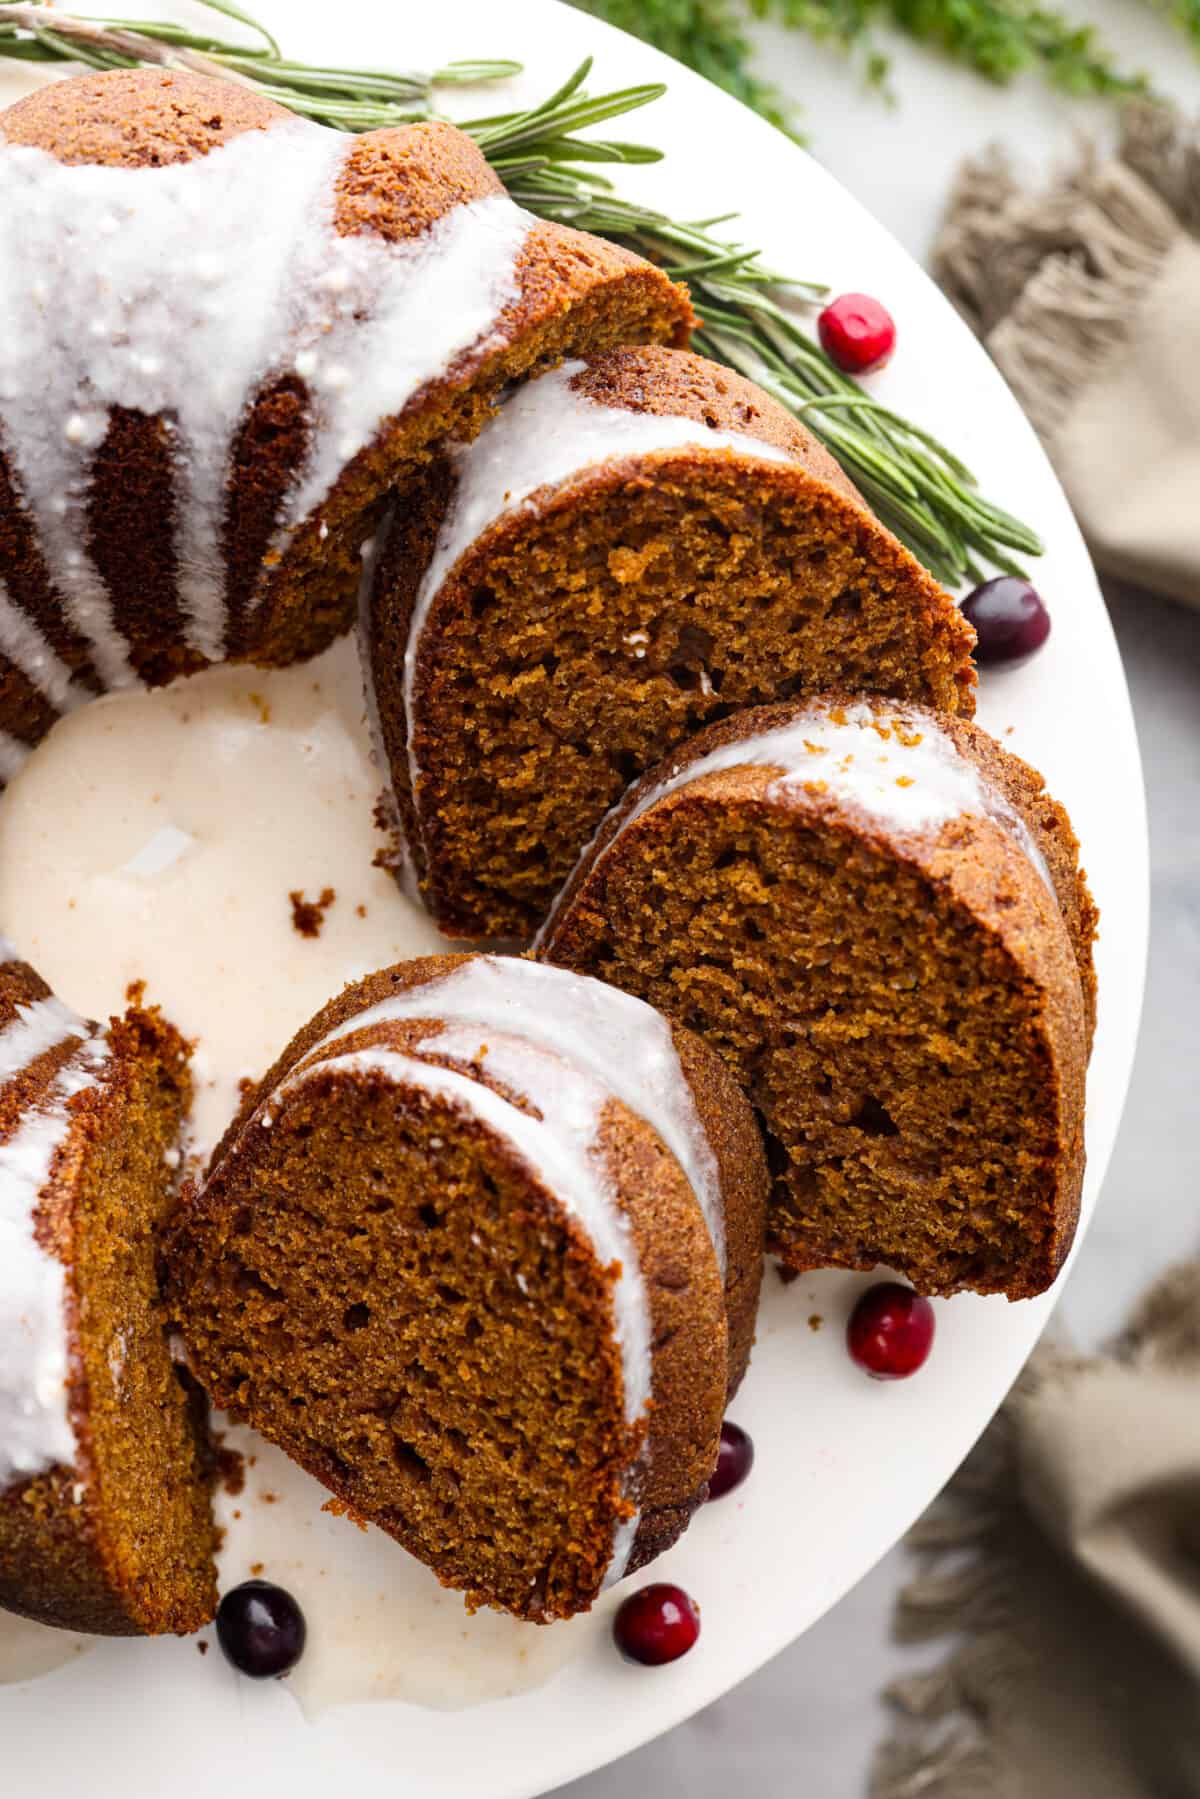 Top-down view of a gingerbread bundt cake, cut into slices.